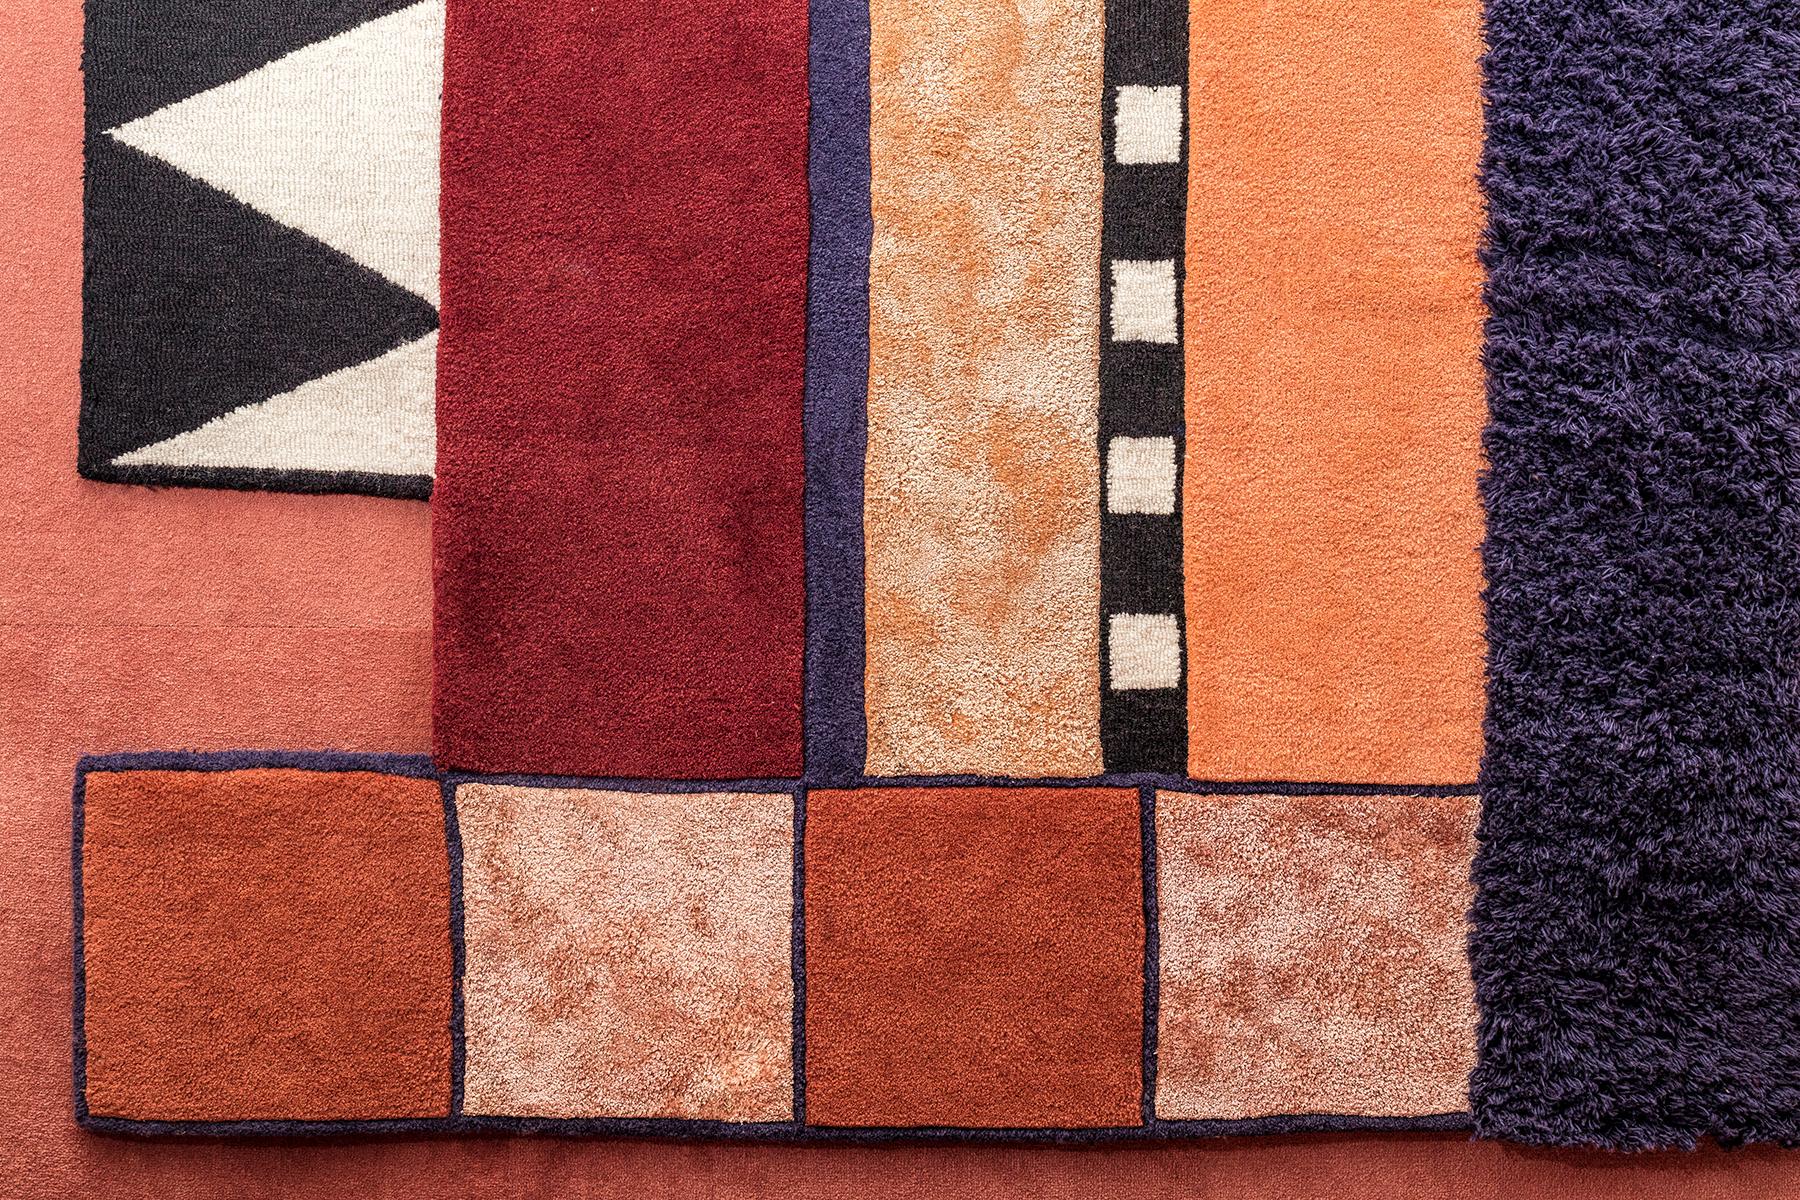 The Crest II track tapestry rug draws inspiration from the tracks run by athletes in ancient Olympic Games. Deep neutrals and geometric patterns create a bold, edgy vibe. This rug is hand-tufted in India, made with wool, silk, and shag. Can be